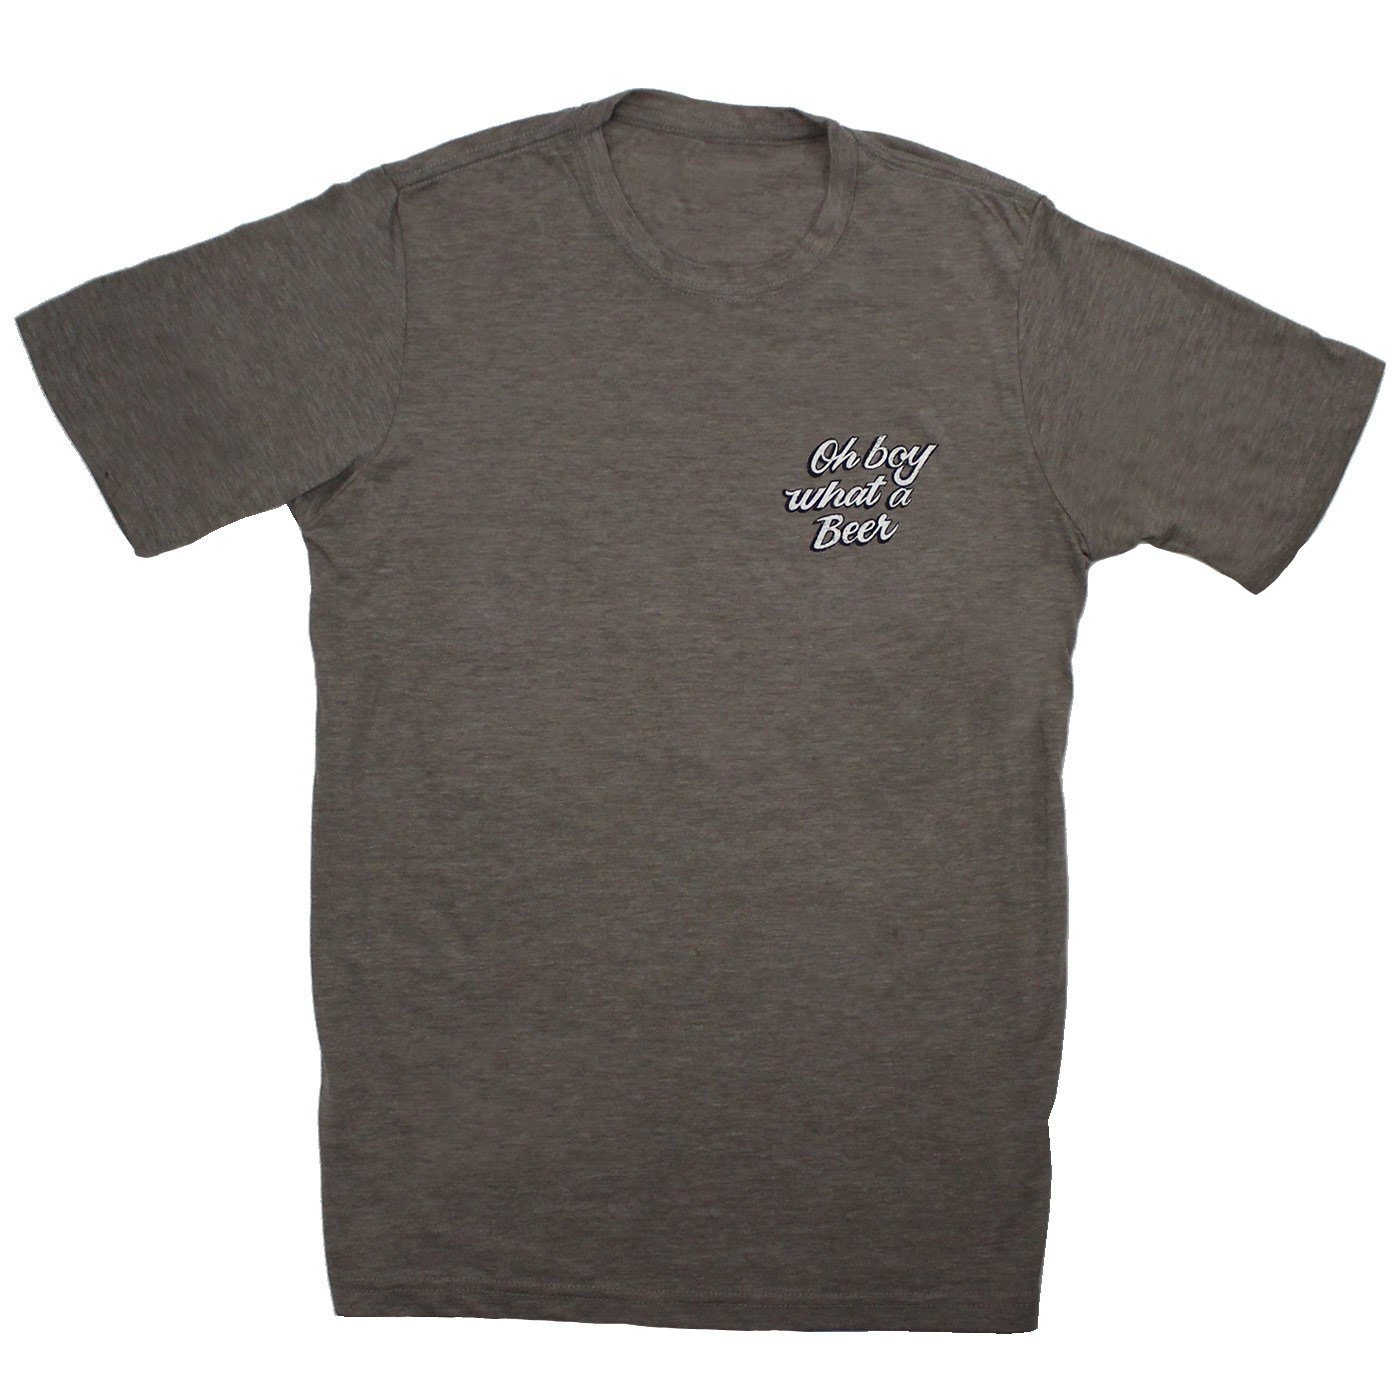 Oh Boy What A Beer (Ash) / Shirt - Route One Apparel